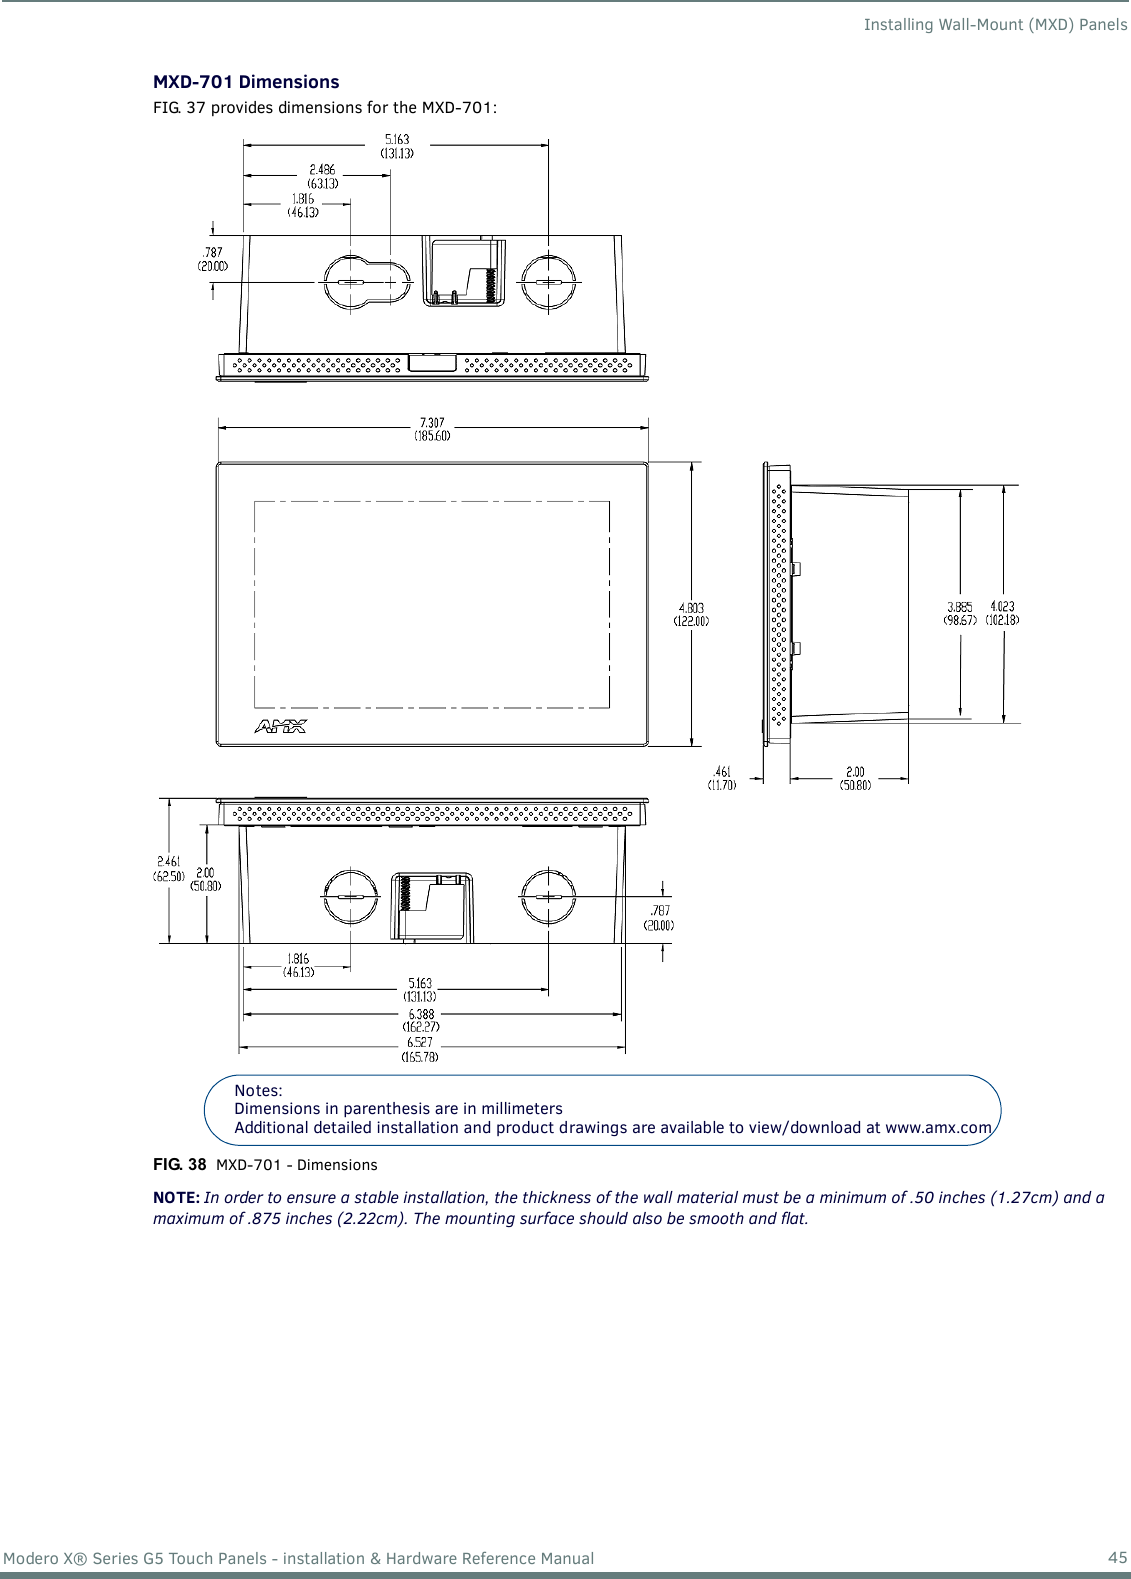 Installing Wall-Mount (MXD) Panels45Modero X® Series G5 Touch Panels - installation &amp; Hardware Reference ManualMXD-701 DimensionsFIG. 37 provides dimensions for the MXD-701: NOTE: In order to ensure a stable installation, the thickness of the wall material must be a minimum of .50 inches (1.27cm) and a maximum of .875 inches (2.22cm). The mounting surface should also be smooth and flat.FIG. 38  MXD-701 - DimensionsNotes: Dimensions in parenthesis are in millimetersAdditional detailed installation and product drawings are available to view/download at www.amx.com 